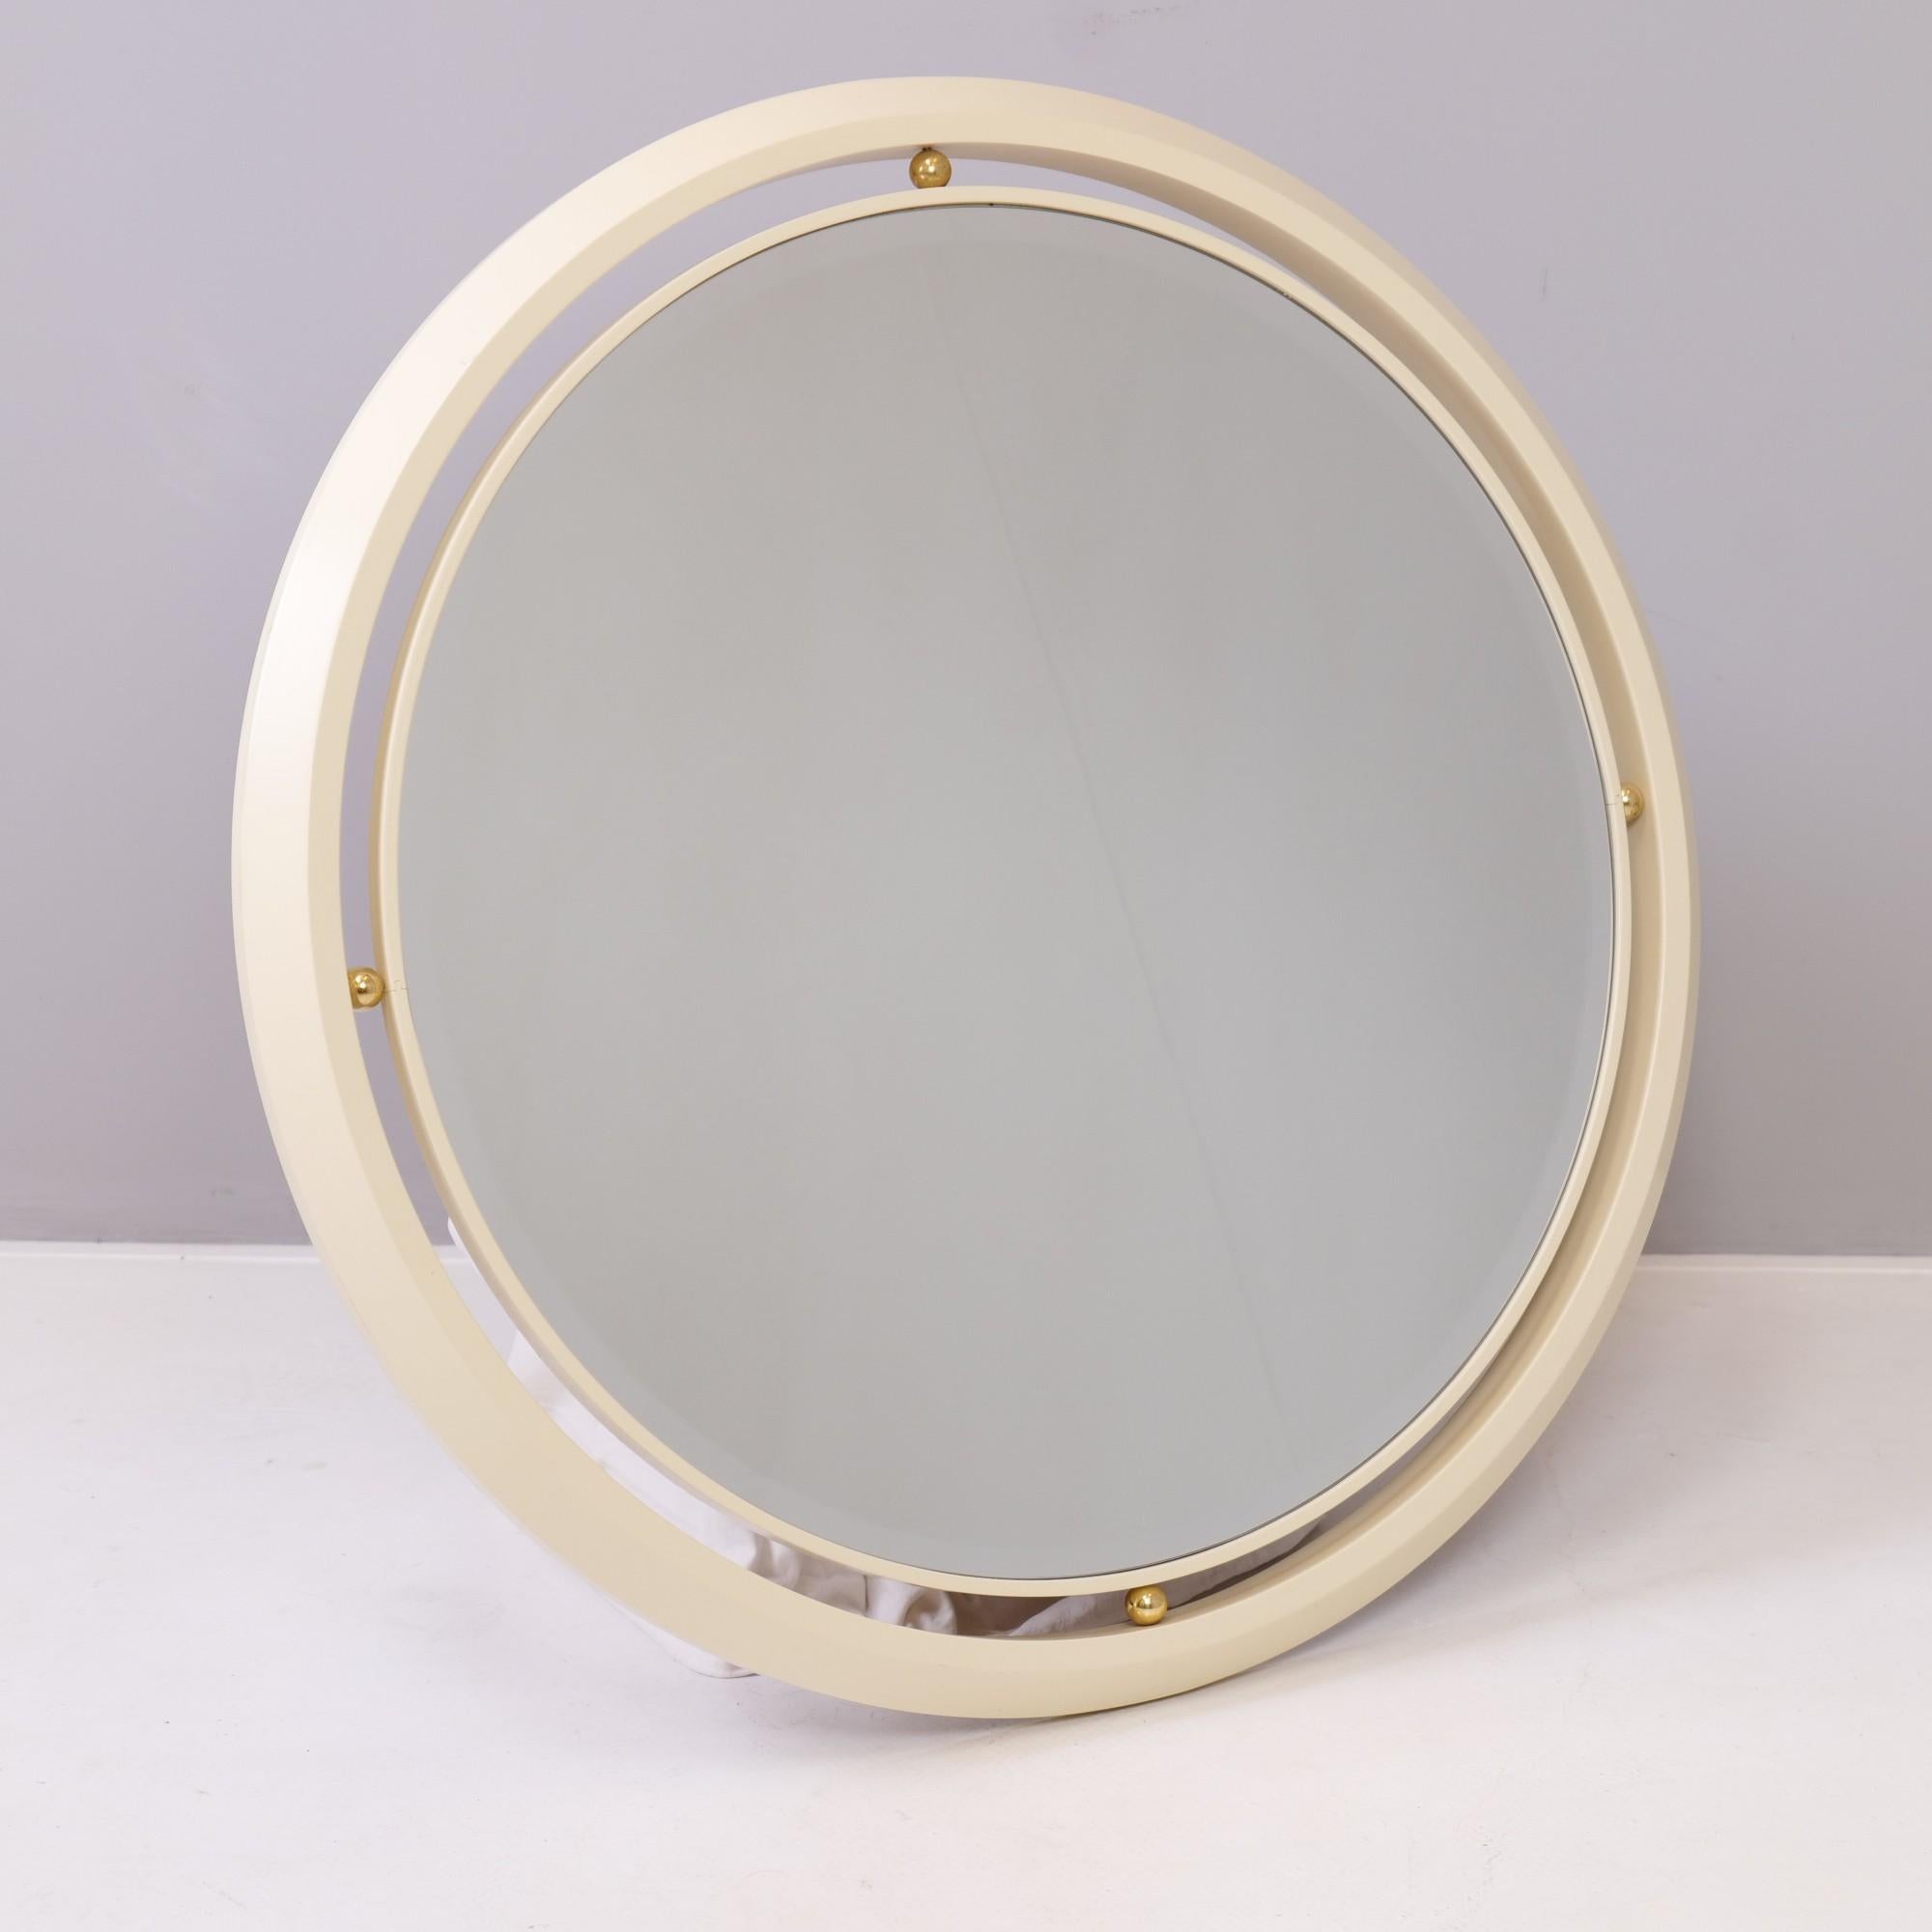 Big regency hollywood facetted round mirror in good condition with slight signs of patina.